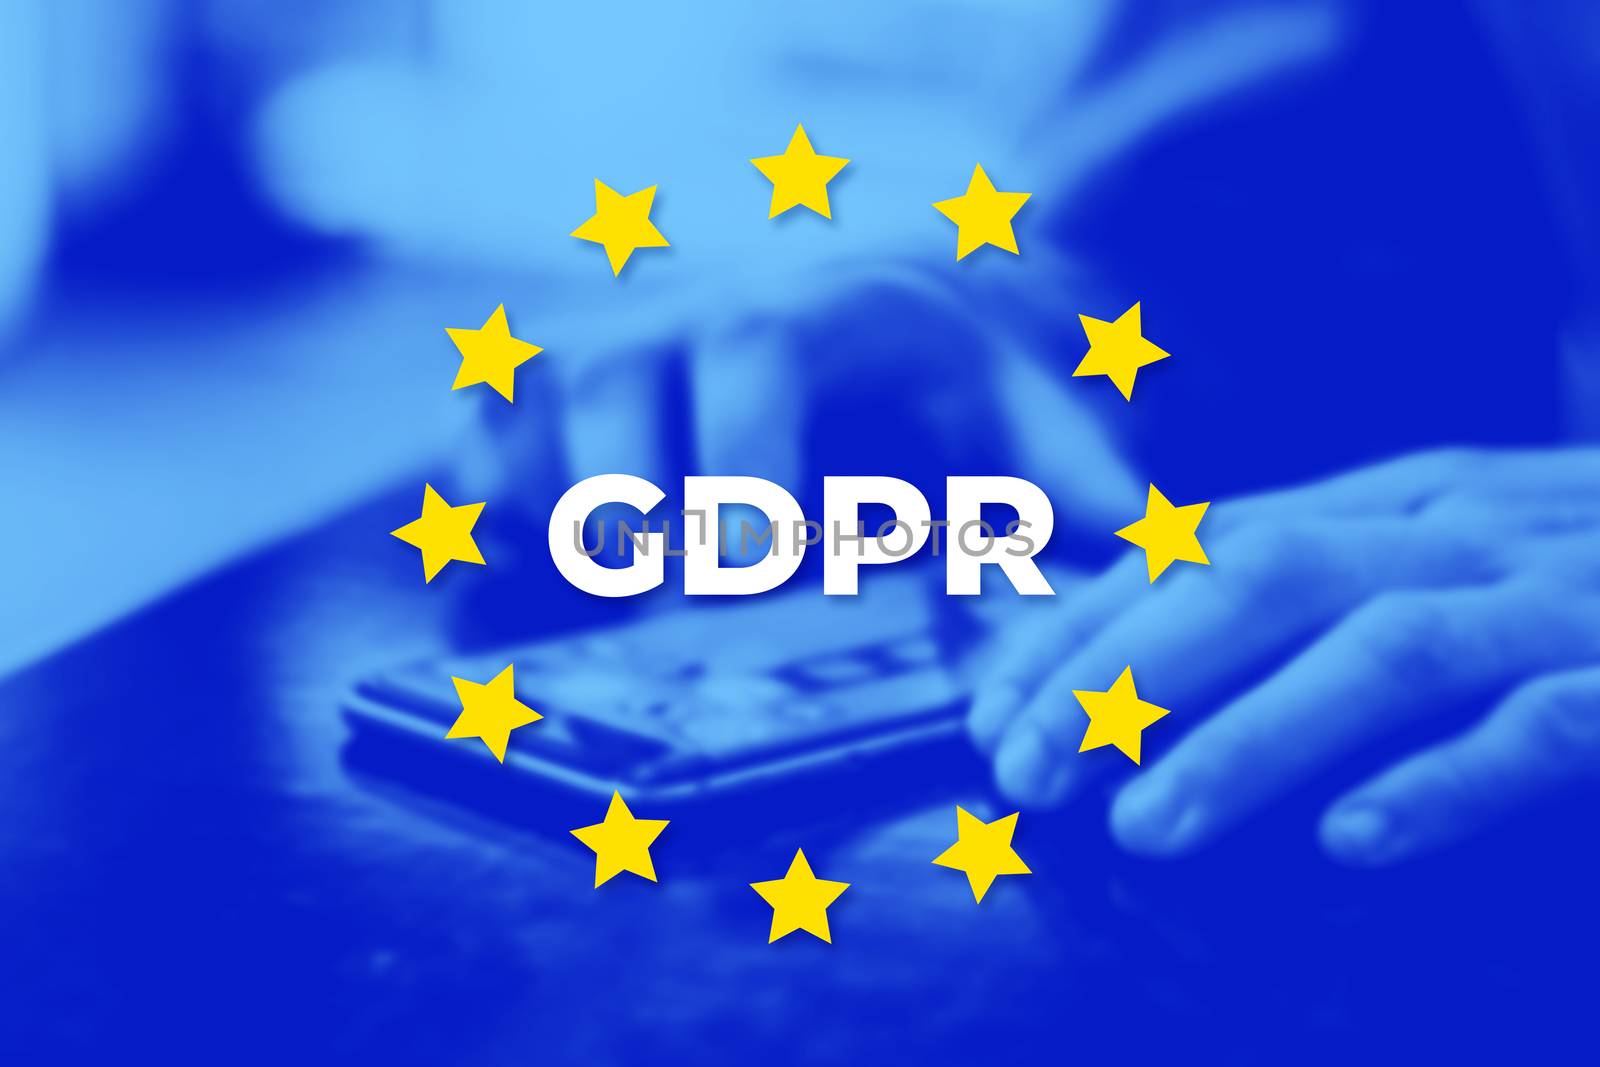 GDPR - General Data Protection Regulation. EU flag with blue photo background. User protects their data on a mobile phone